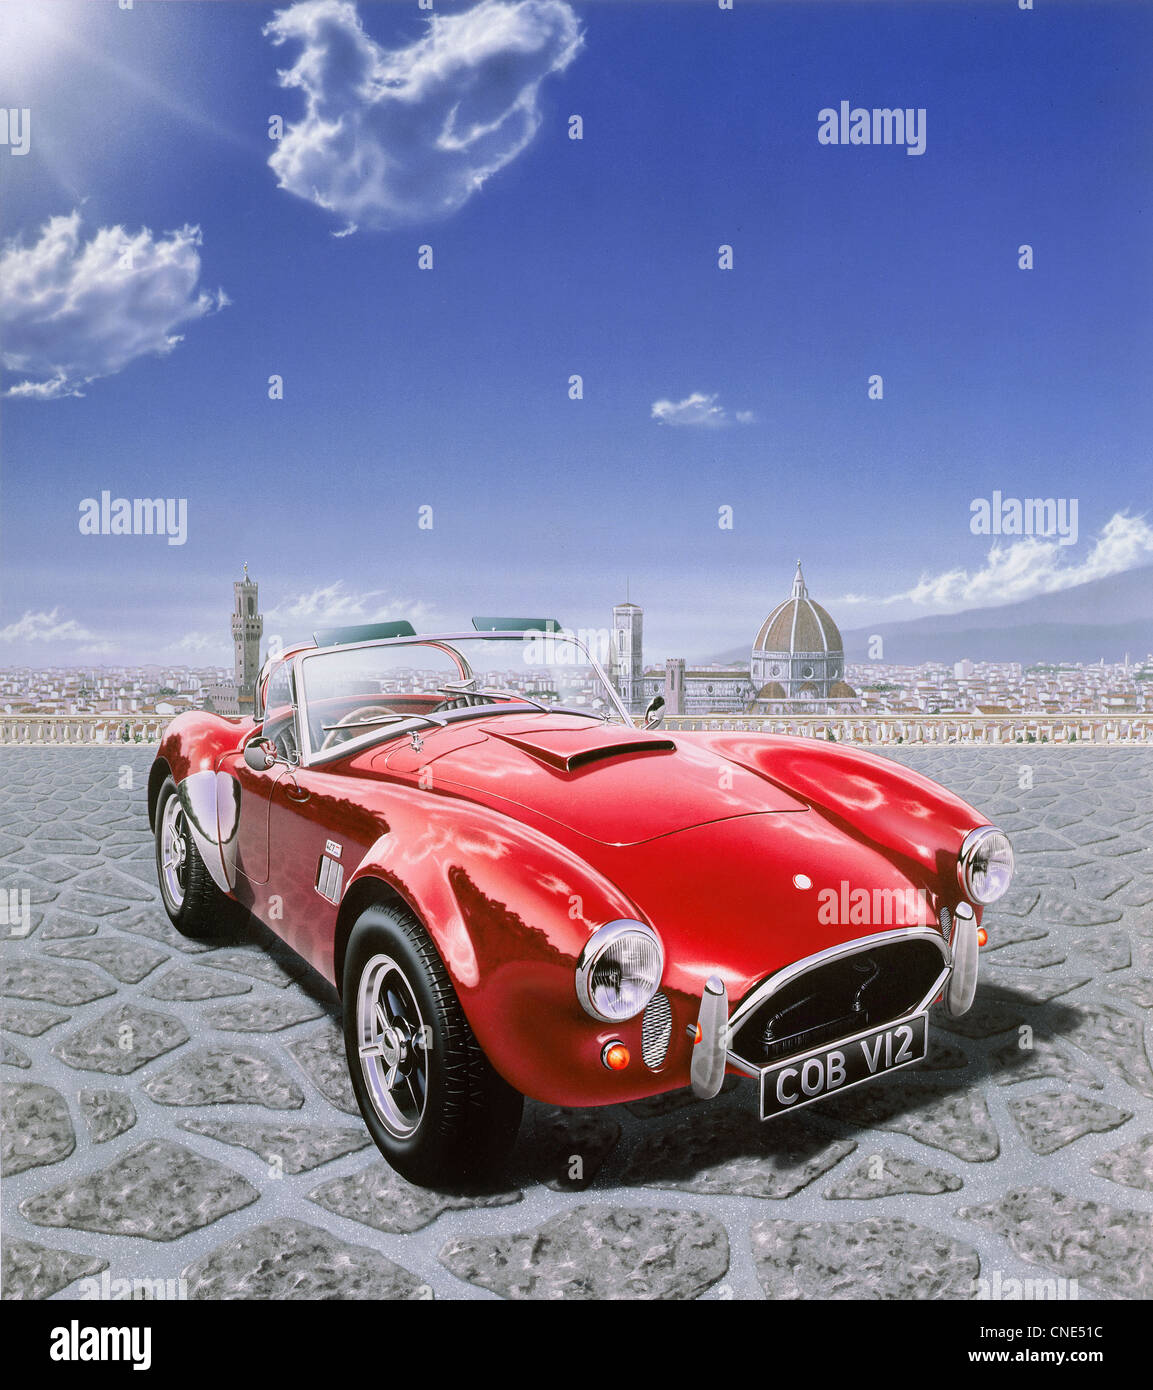 AC Cobra car, in Michelangelo Square in Florence, Italy. With the cityscape in the background. Airbrush illustration. Stock Photo